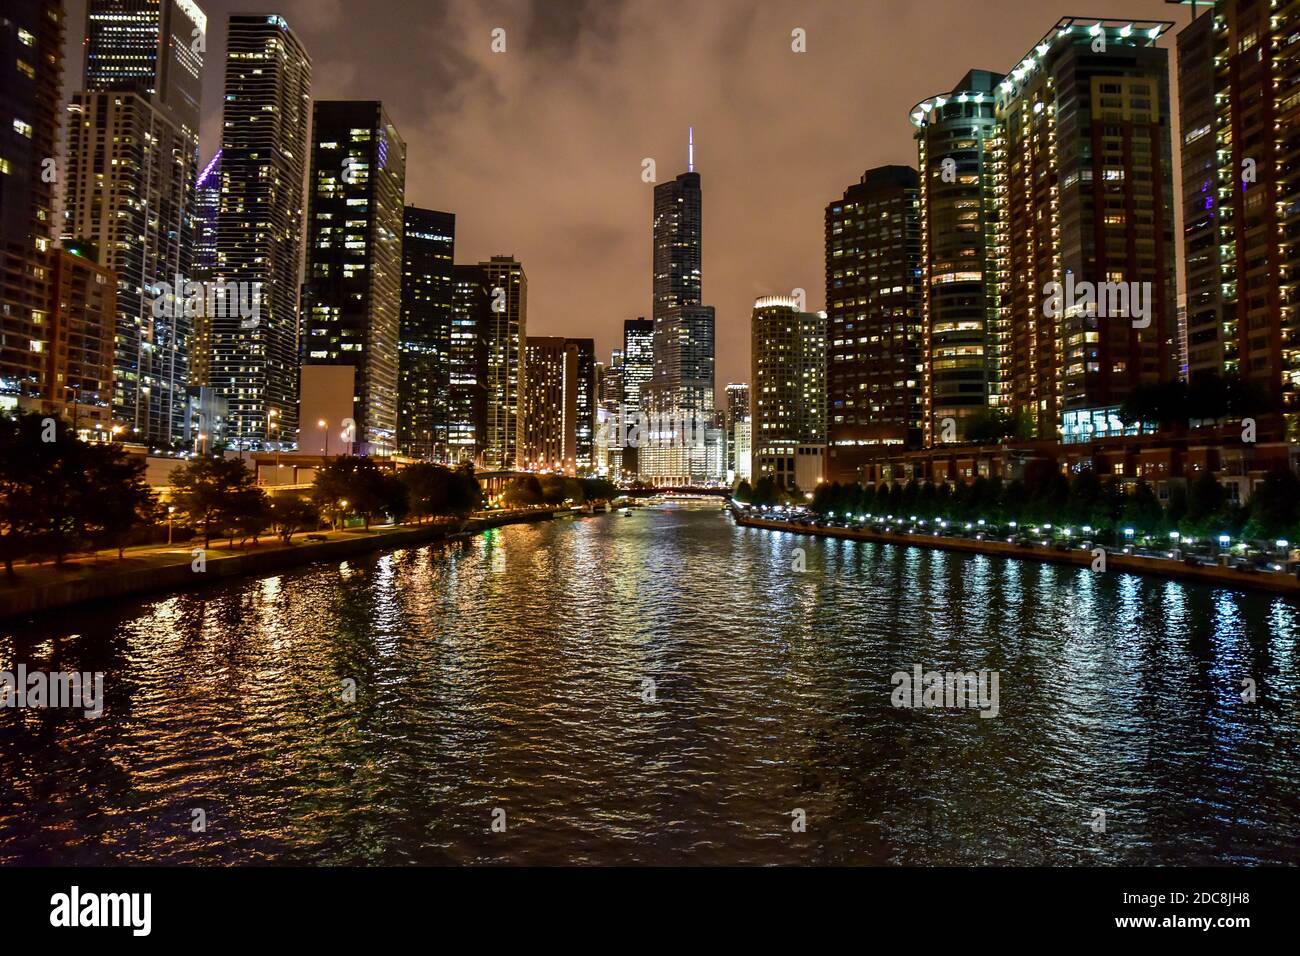 Big city skyline lights at night with river running through Stock Photo